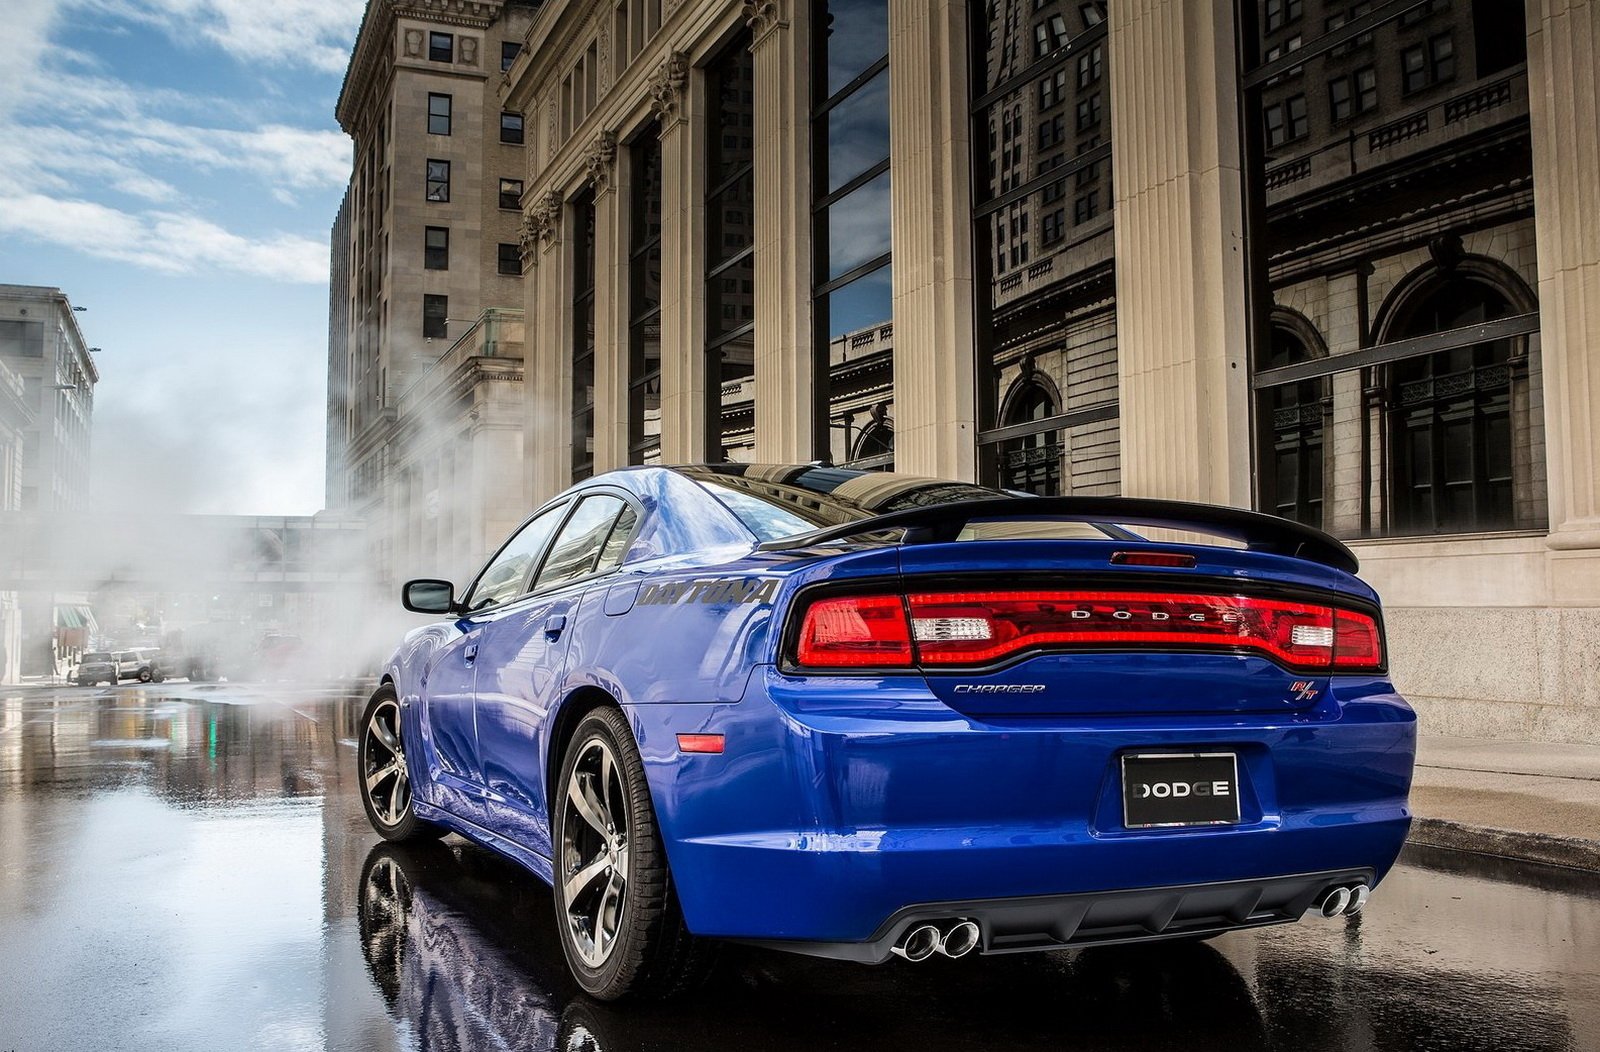 Dodge Charger Wallpaper and Background Image | 1600x1052